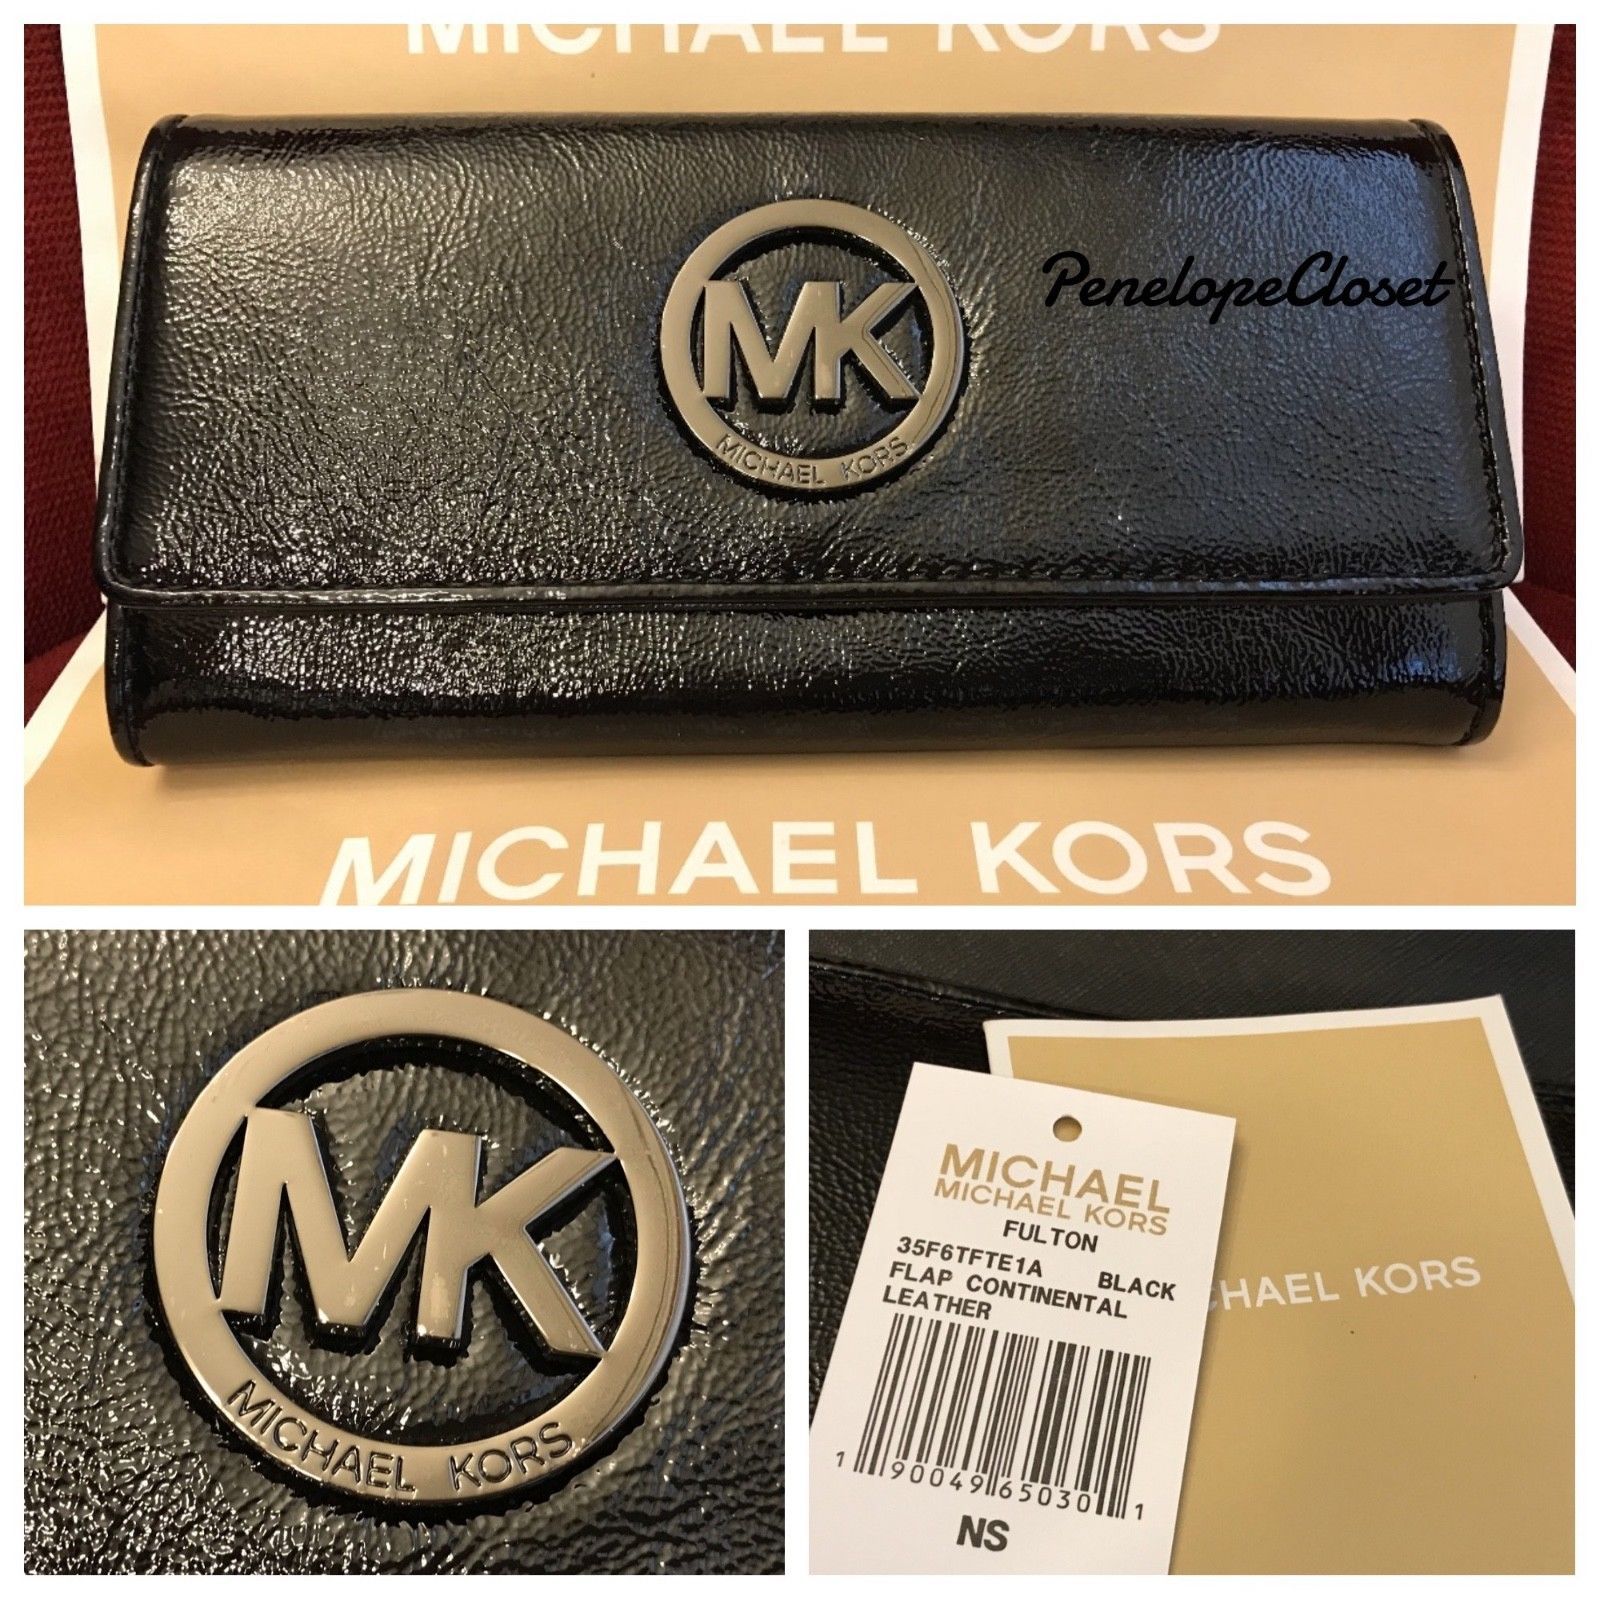 NWT MICHAEL KORS PATENT LEATHER FULTON FLAP CONTINENTAL WALLET IN BLACK - $62.88